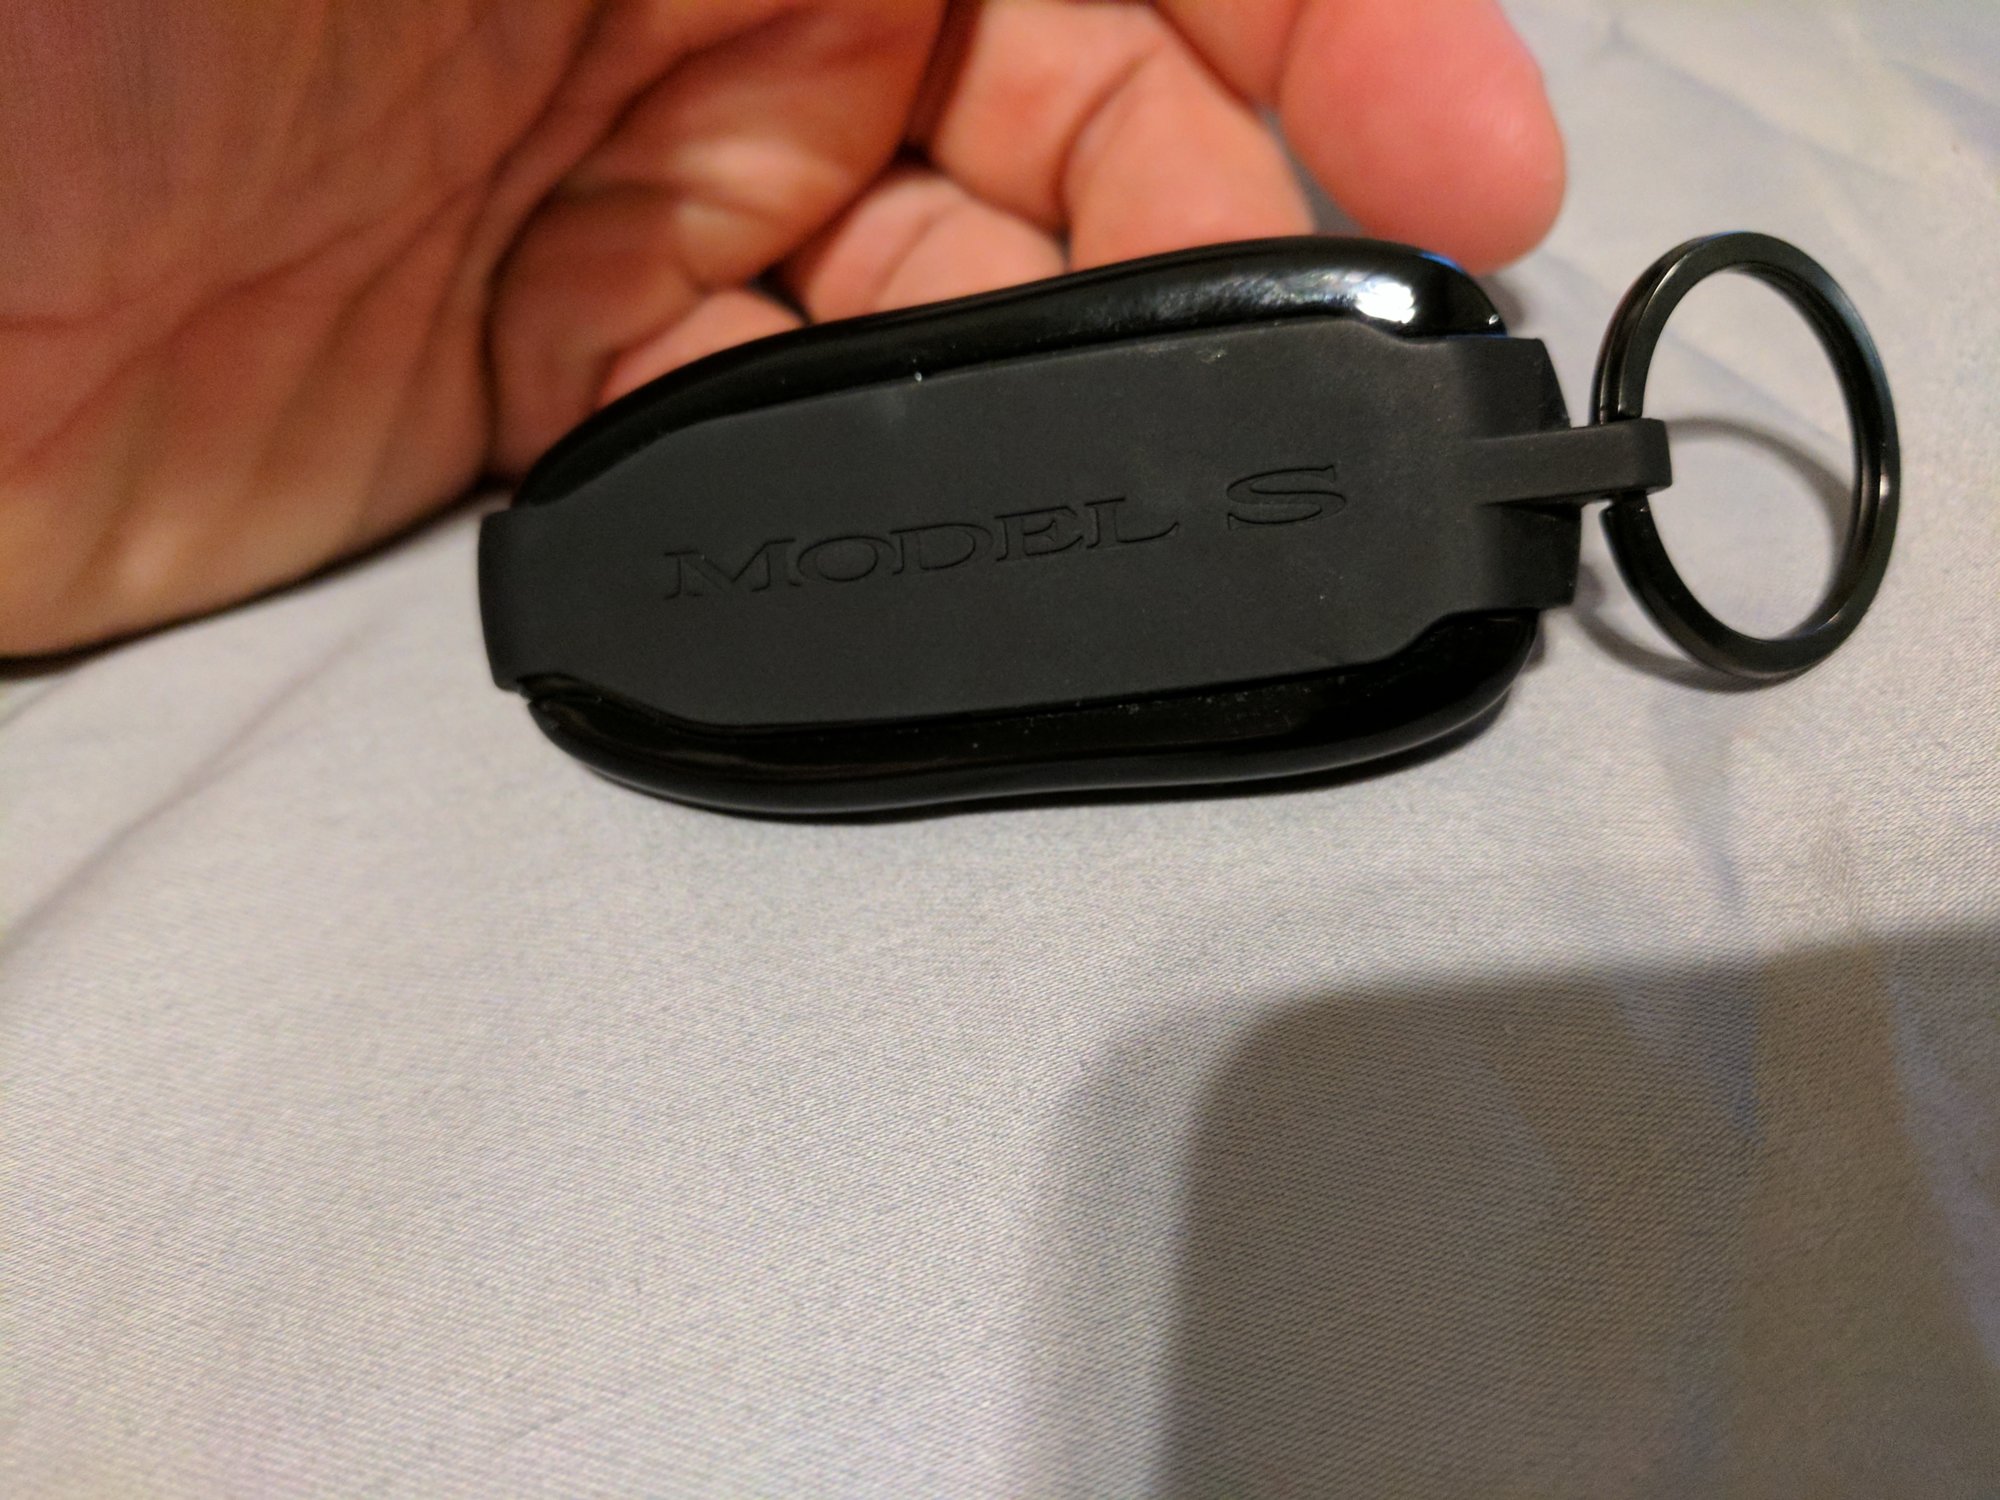 Tesla starts shipping new key fob with Bluetooth Low Energy (BLE